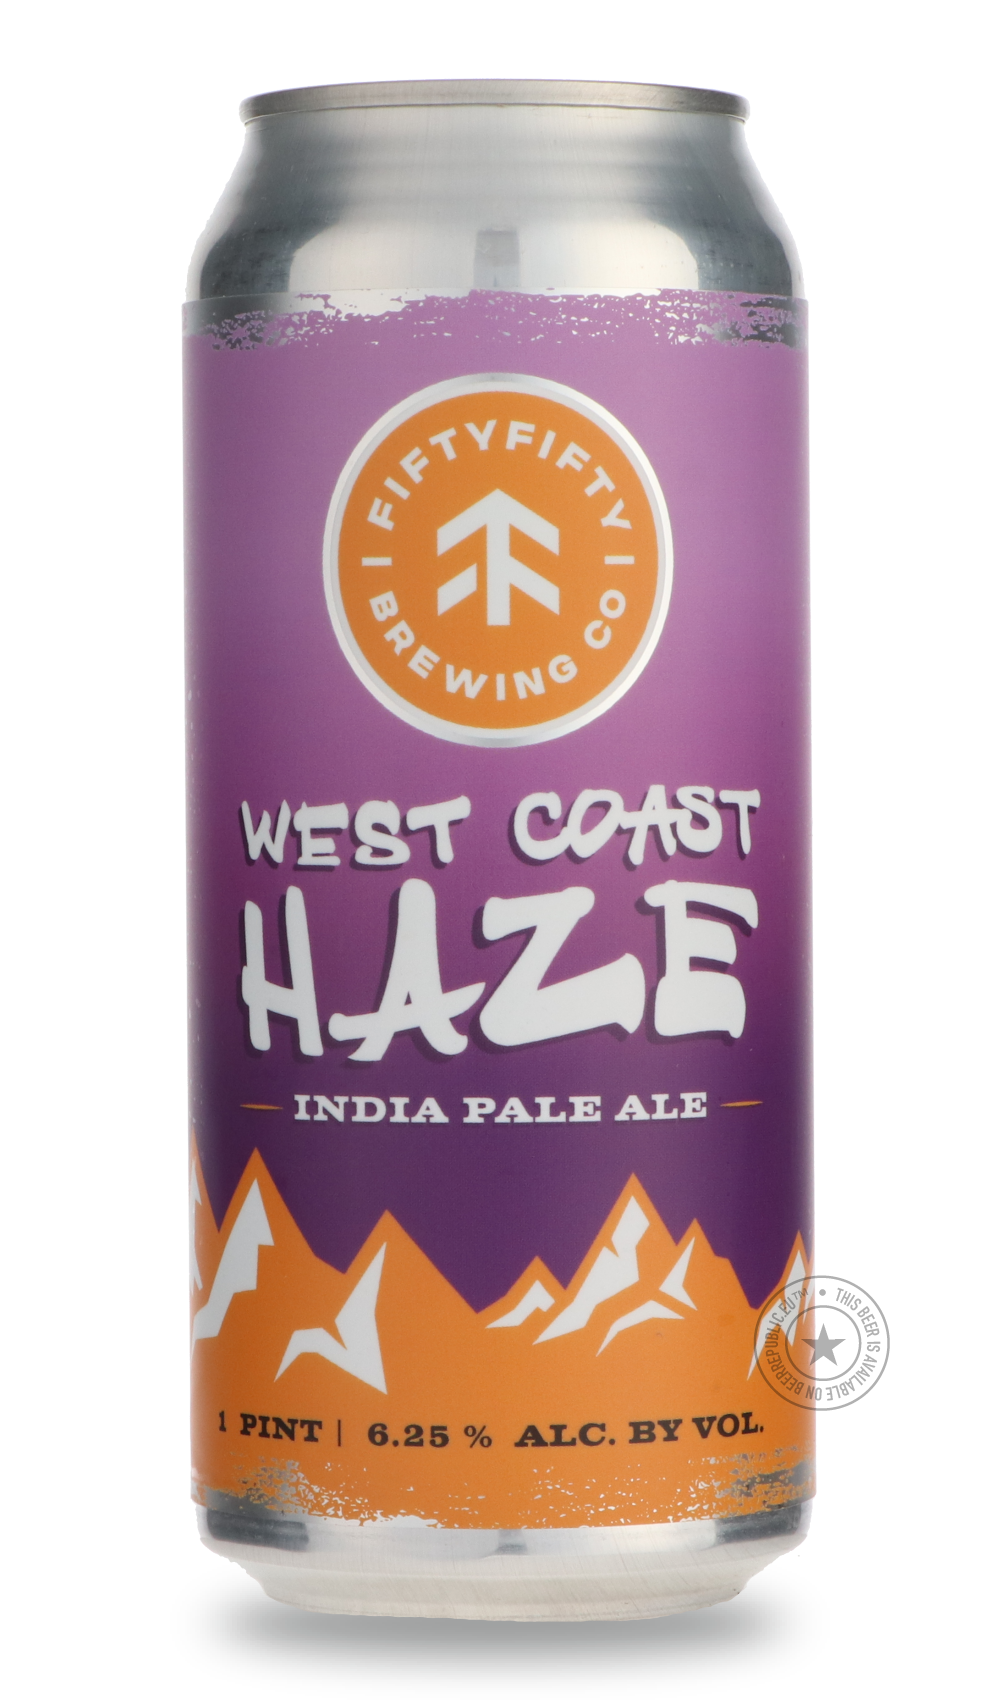 -FiftyFifty- West Coast Haze-IPA- Only @ Beer Republic - The best online beer store for American & Canadian craft beer - Buy beer online from the USA and Canada - Bier online kopen - Amerikaans bier kopen - Craft beer store - Craft beer kopen - Amerikanisch bier kaufen - Bier online kaufen - Acheter biere online - IPA - Stout - Porter - New England IPA - Hazy IPA - Imperial Stout - Barrel Aged - Barrel Aged Imperial Stout - Brown - Dark beer - Blond - Blonde - Pilsner - Lager - Wheat - Weizen - Amber - Barl